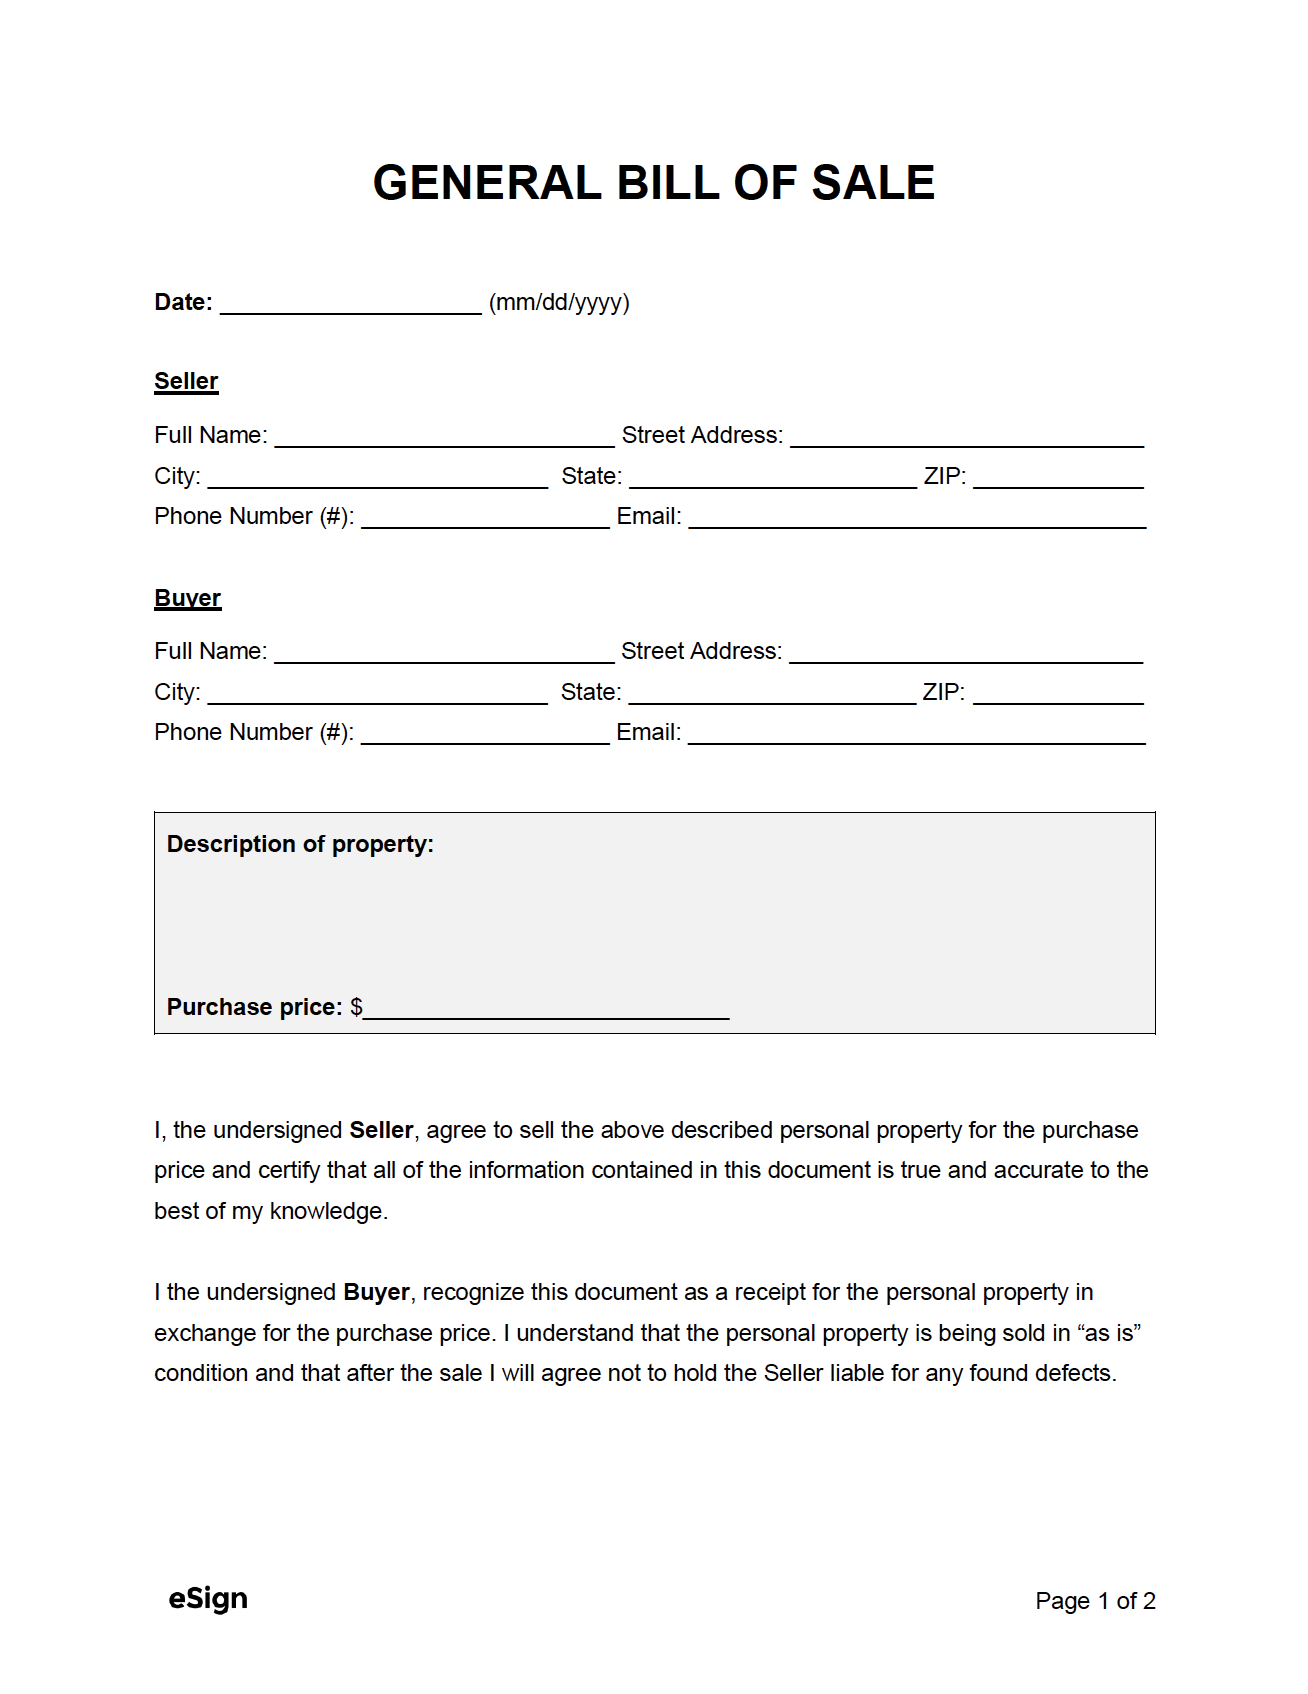 Free General Bill Of Sale Form | Pdf | Word with Free Printable Generic Bill Of Sale